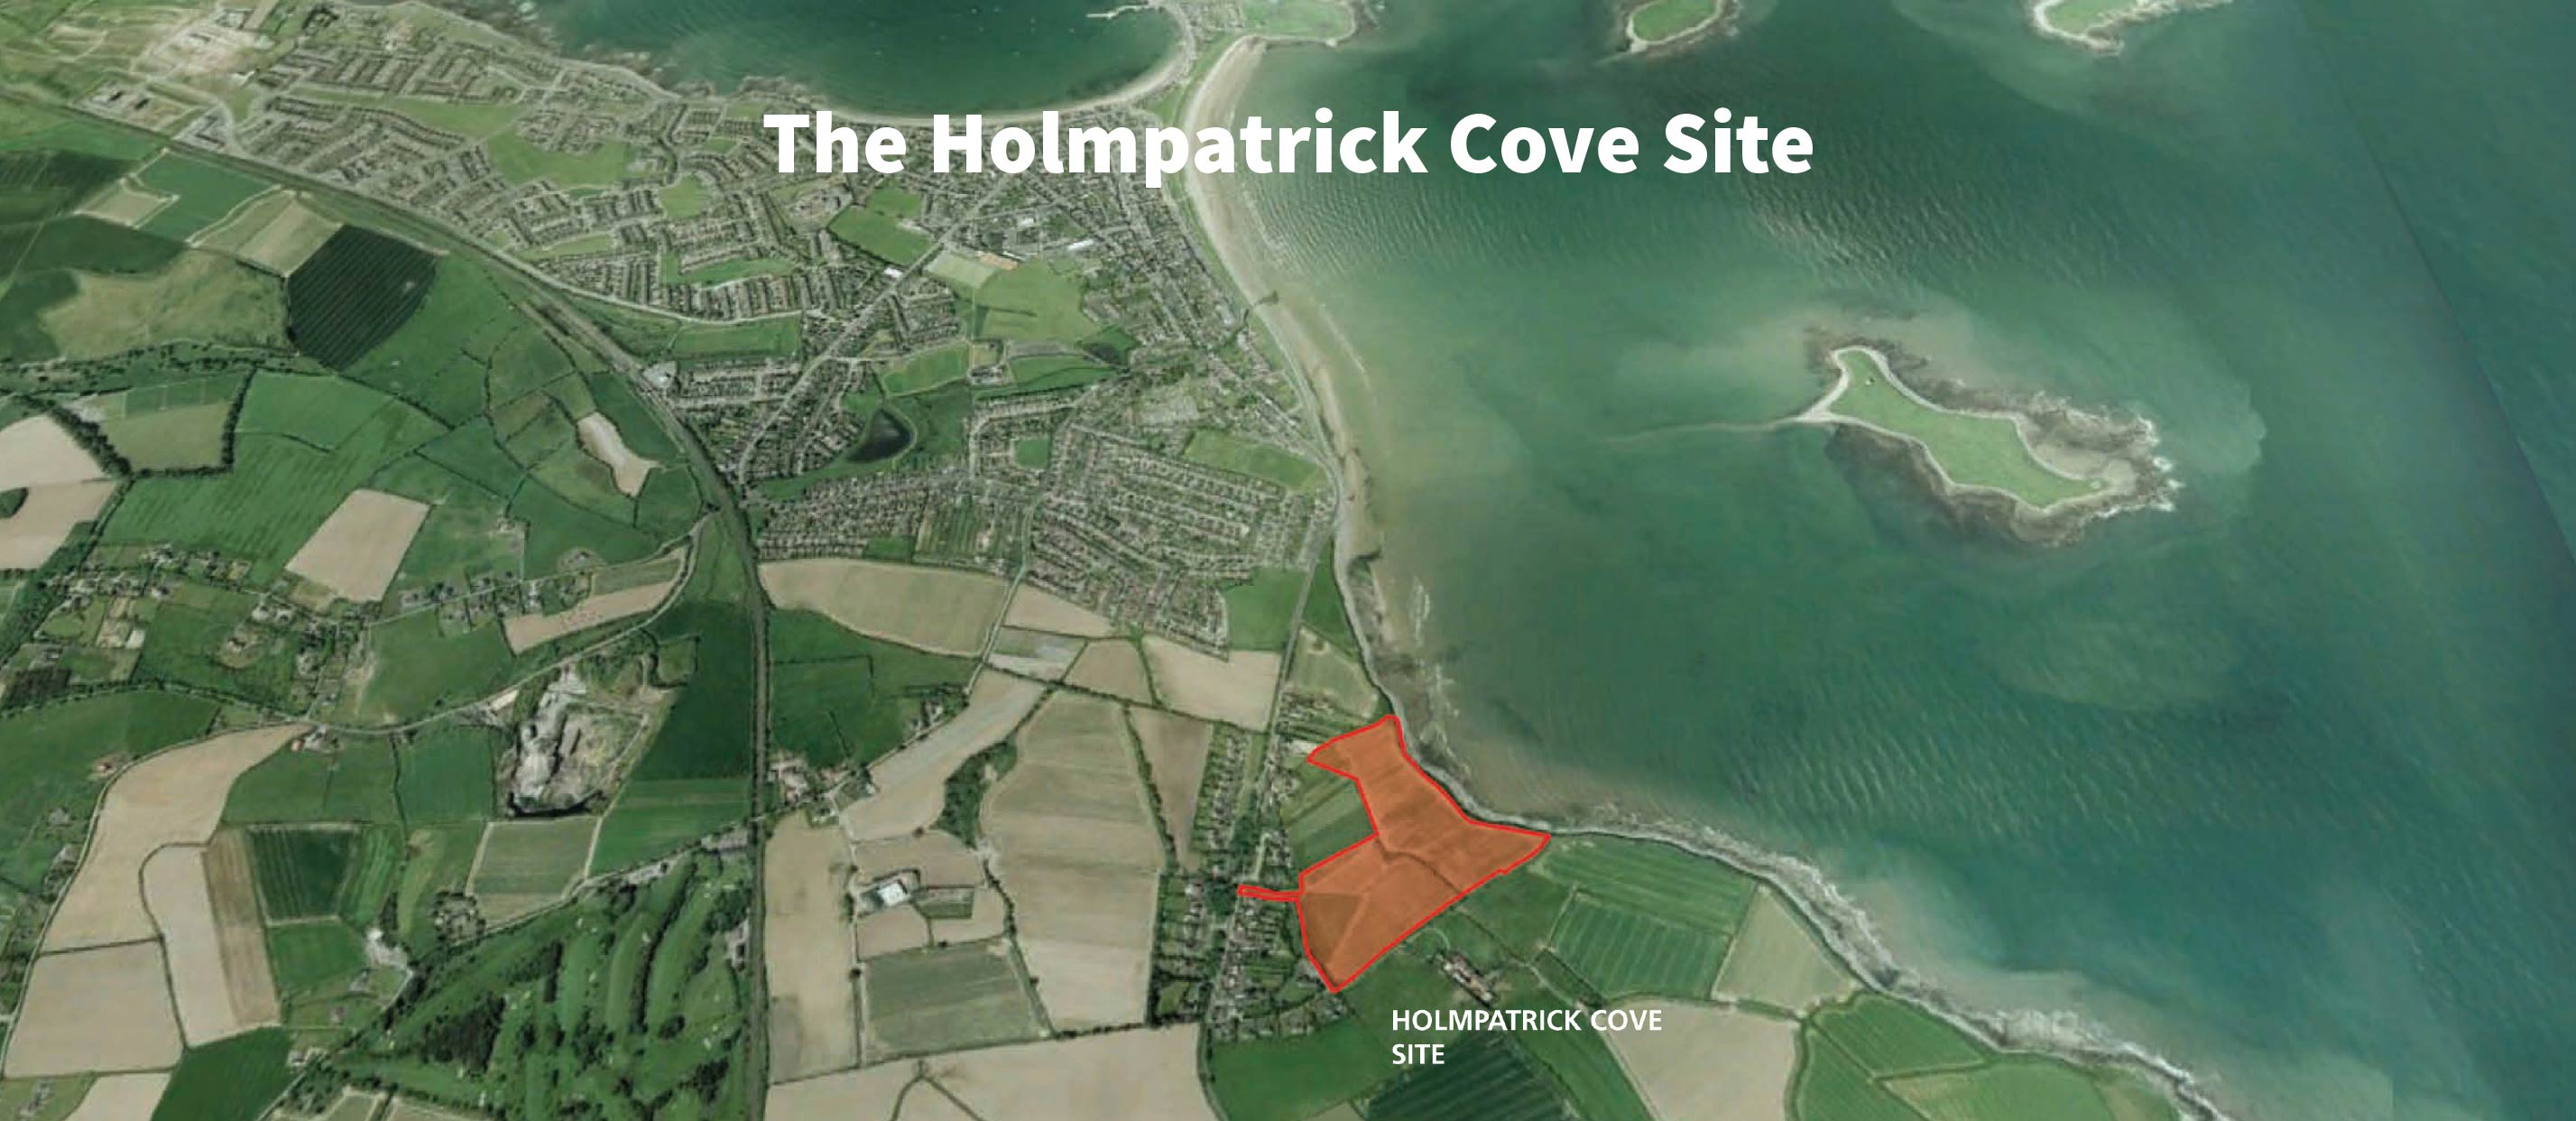 Satellite image of the Holmpatrick Cove site and greater Skerries